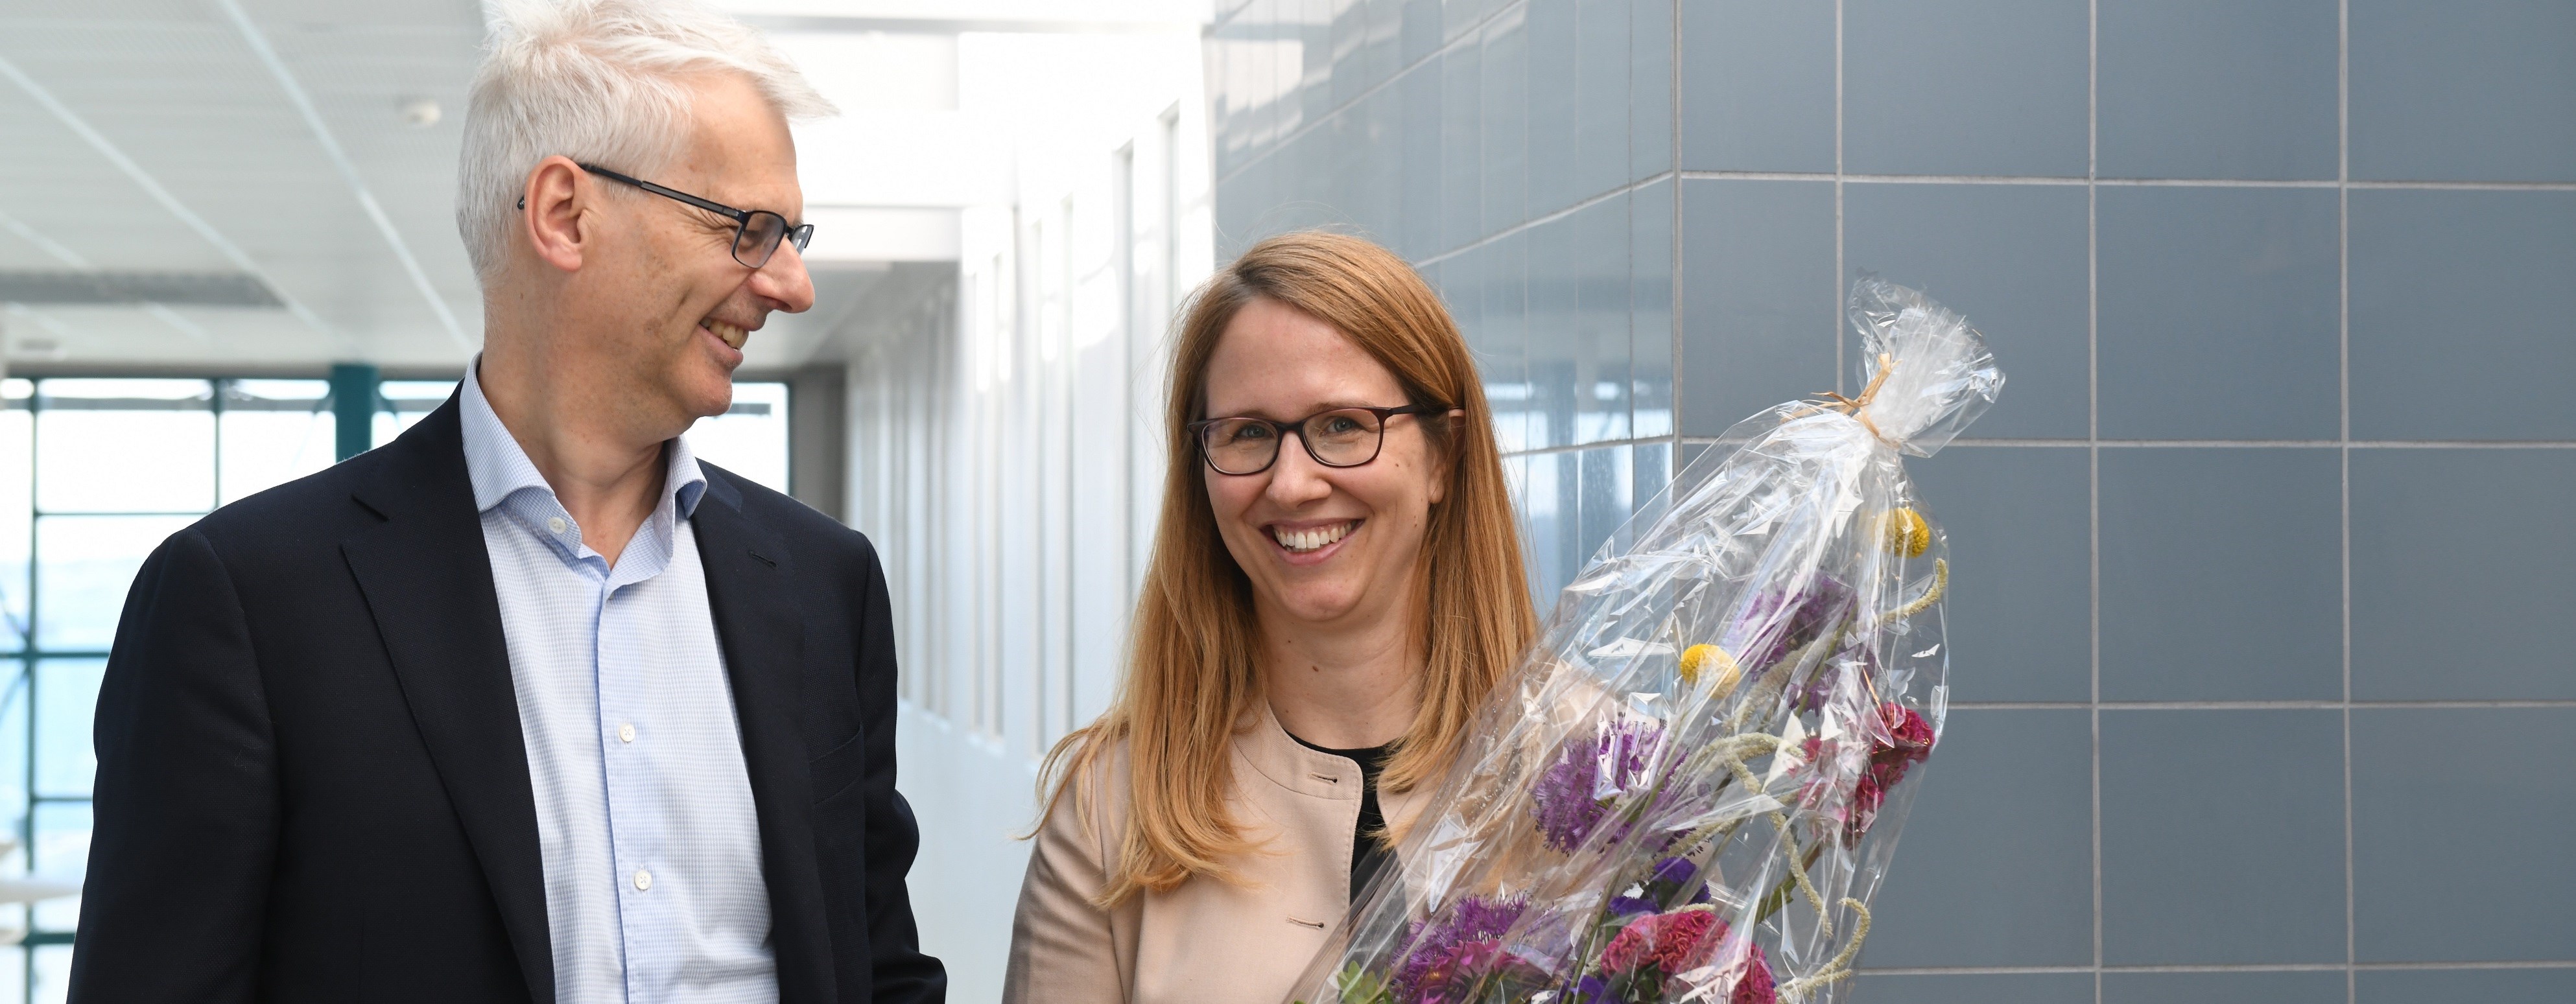 This week Aline Bütikofer was appointed full professor and was congratulated by NHH Rector Øystein. Her research contributes to a growing literature on long-term effects of early investments in children. Photo: Sigrid Folkestad